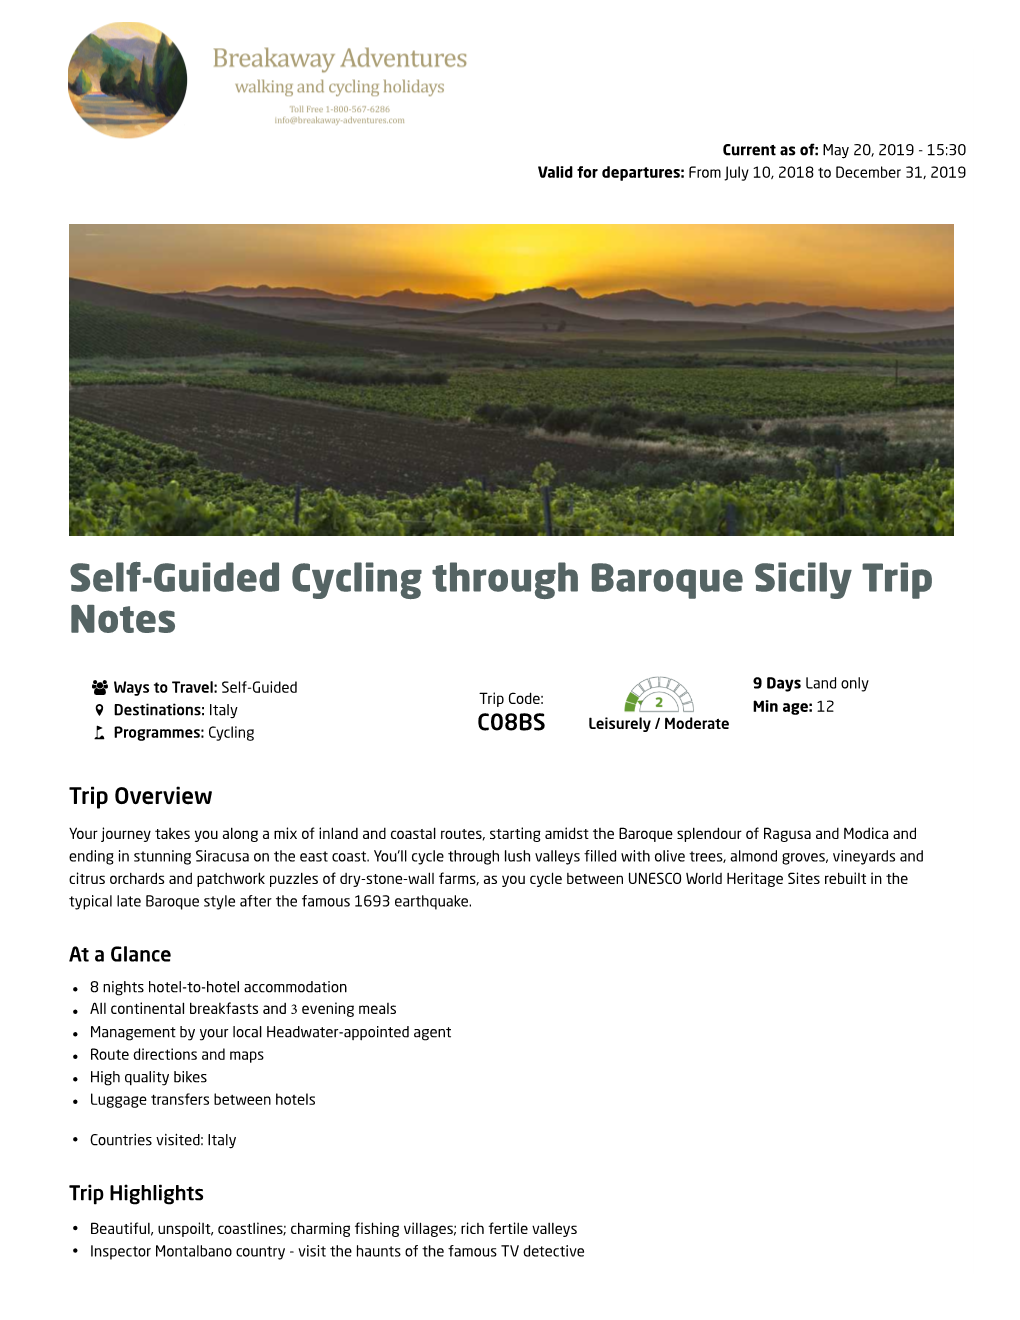 Self-Guided Cycling Through Baroque Sicily Trip Notes